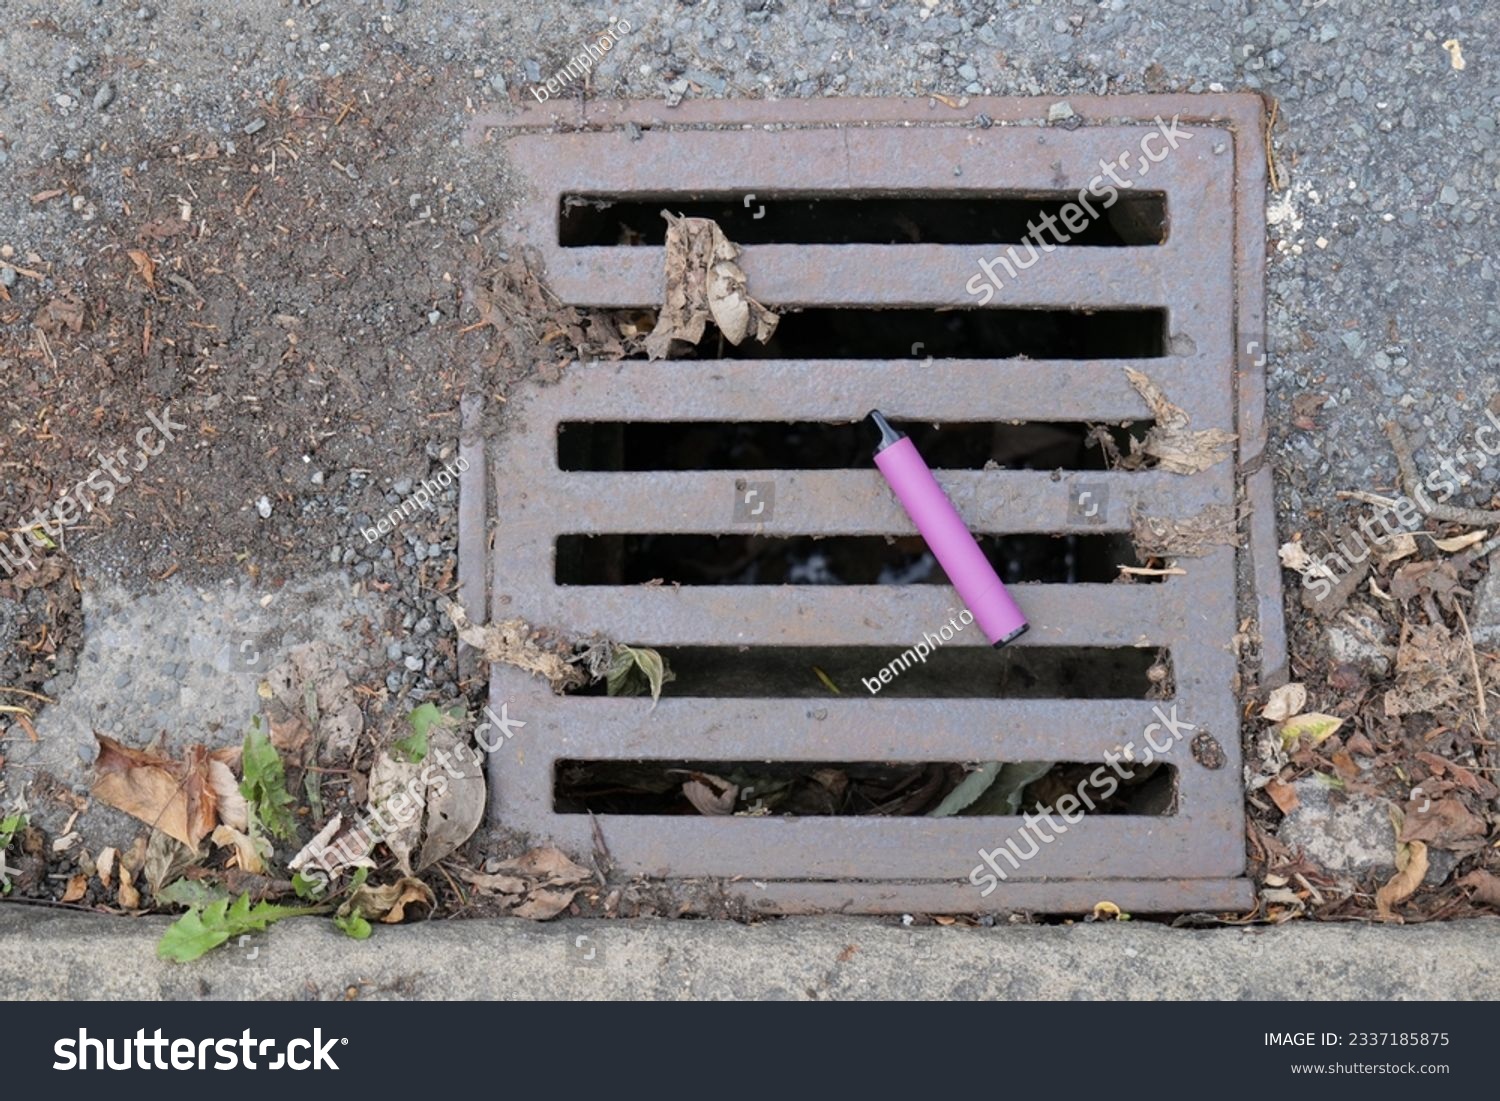 A purple e-cigarette vape has been discarded and left lying on a metal water drain cover. #2337185875